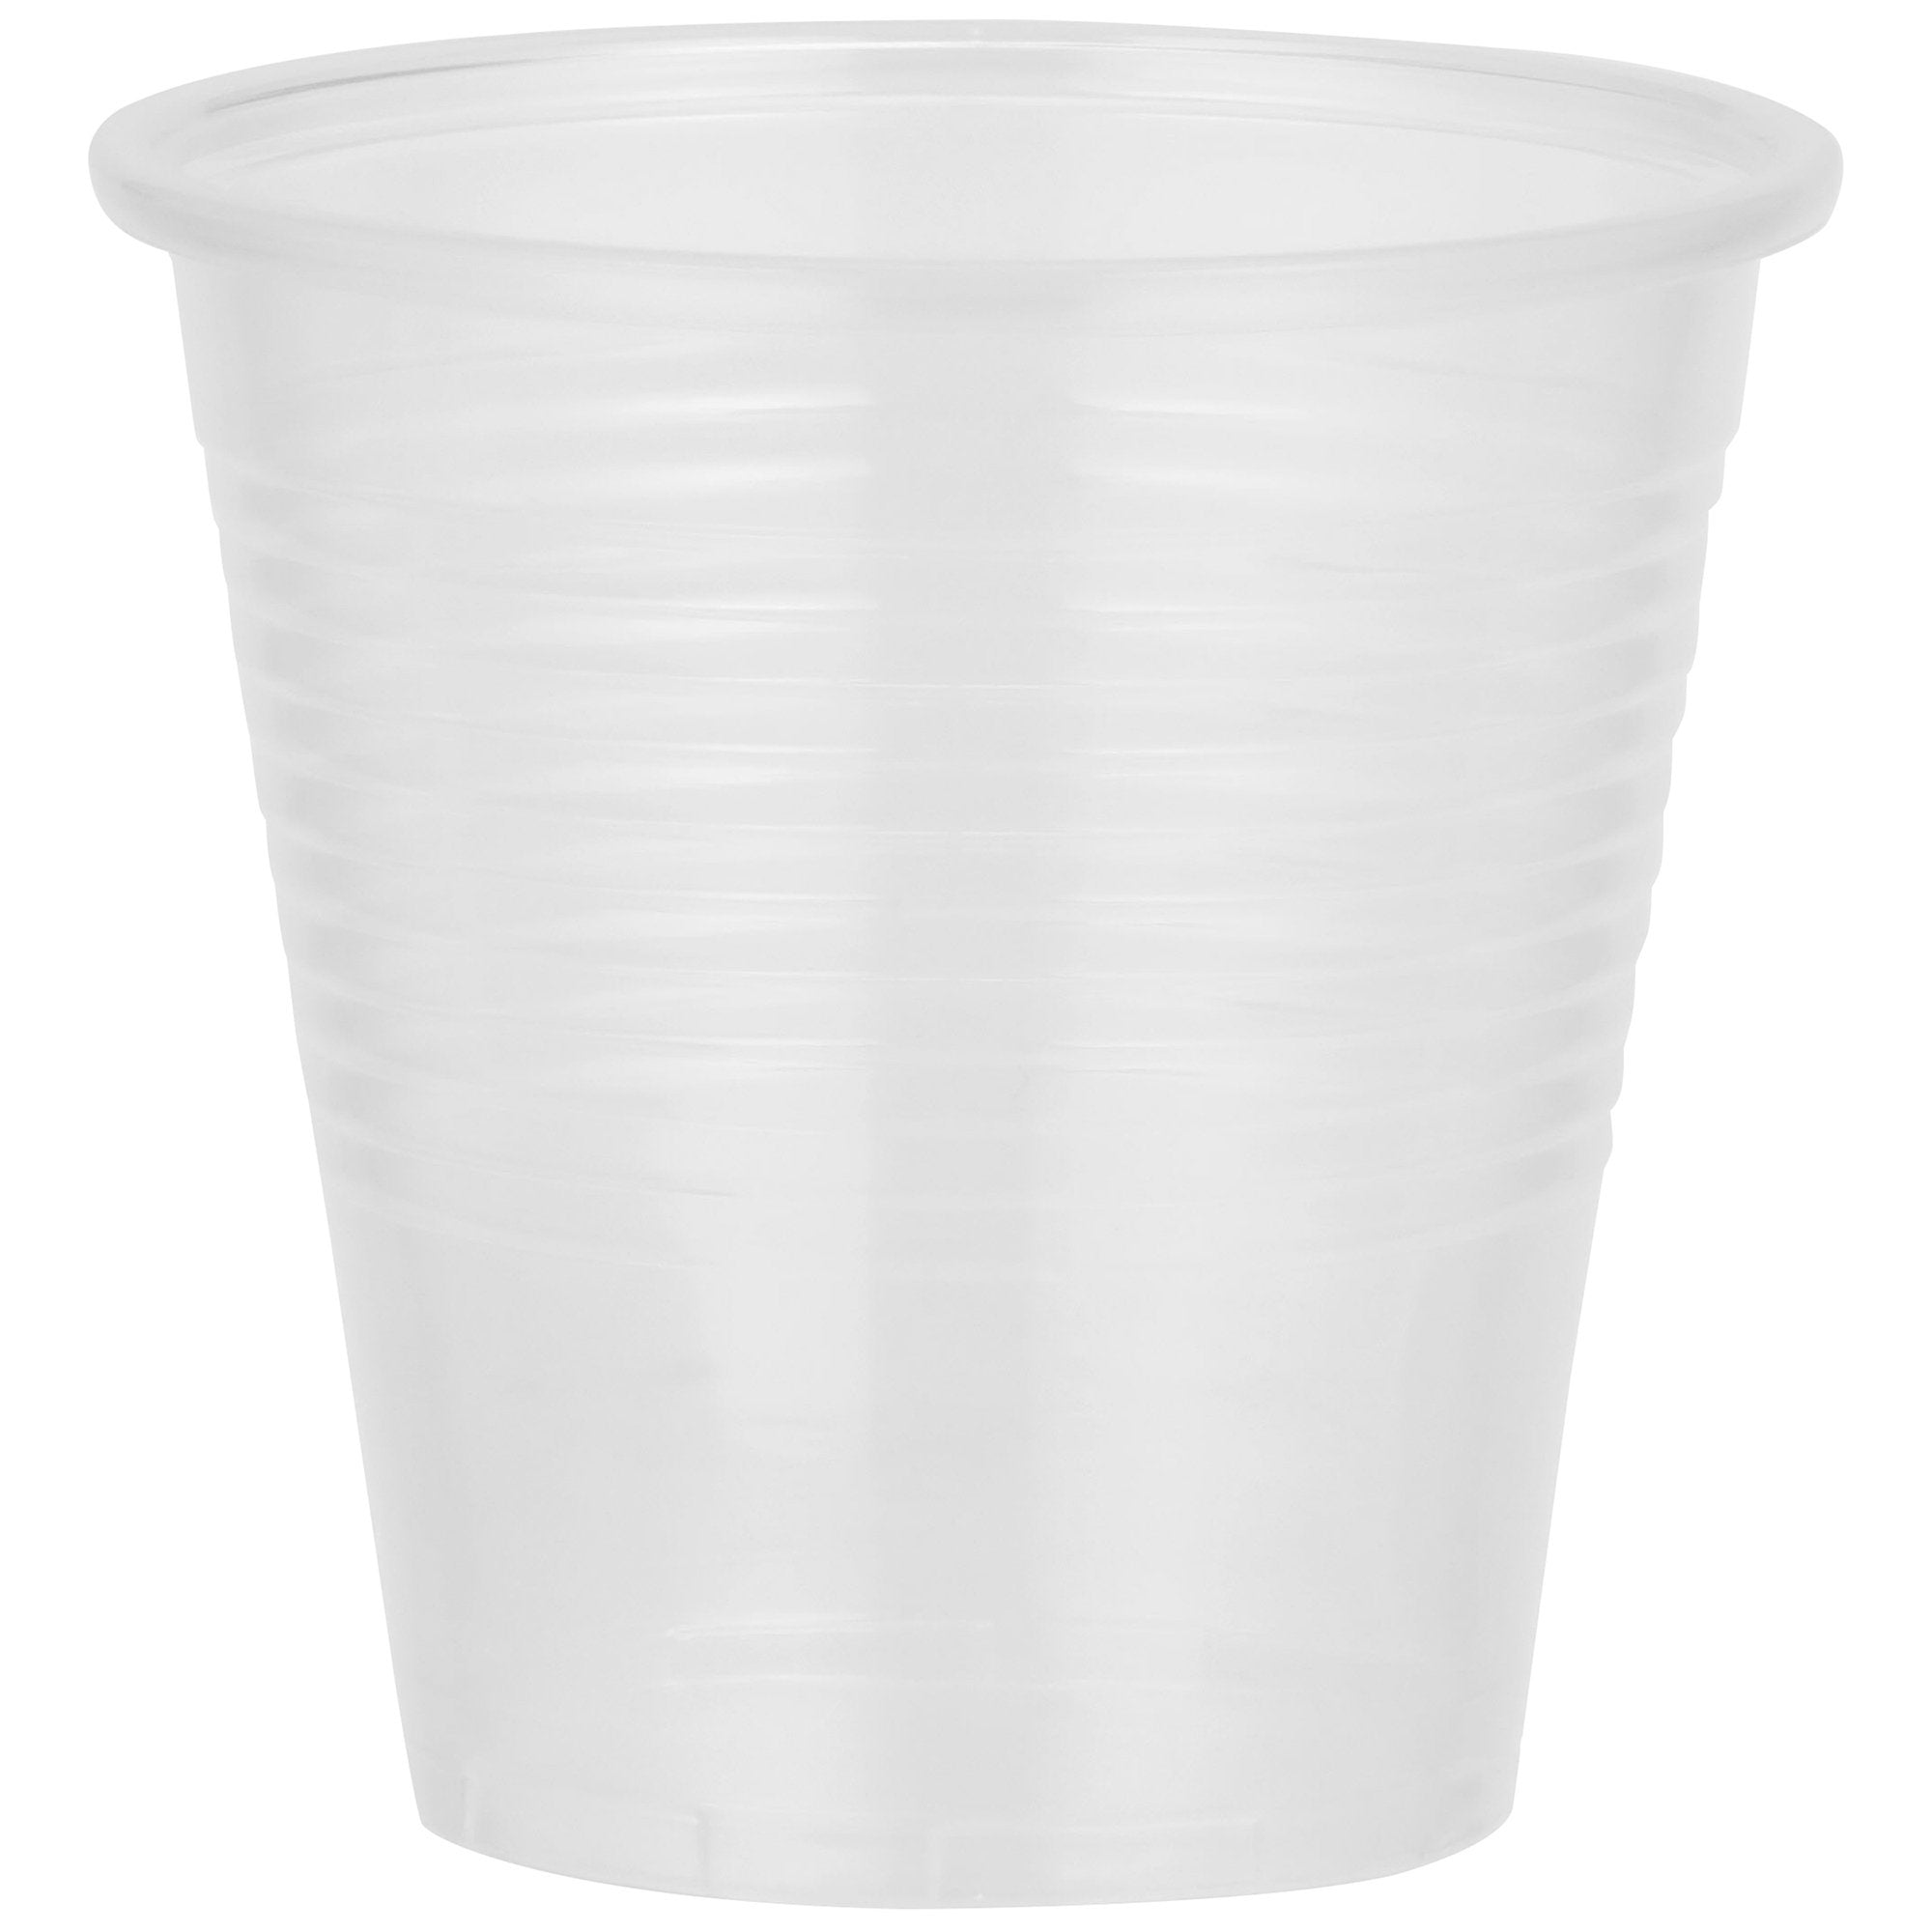 McKesson Clear Polypropylene Disposable Drinking Cups 5 oz - Bulk Pack (2000 Units)